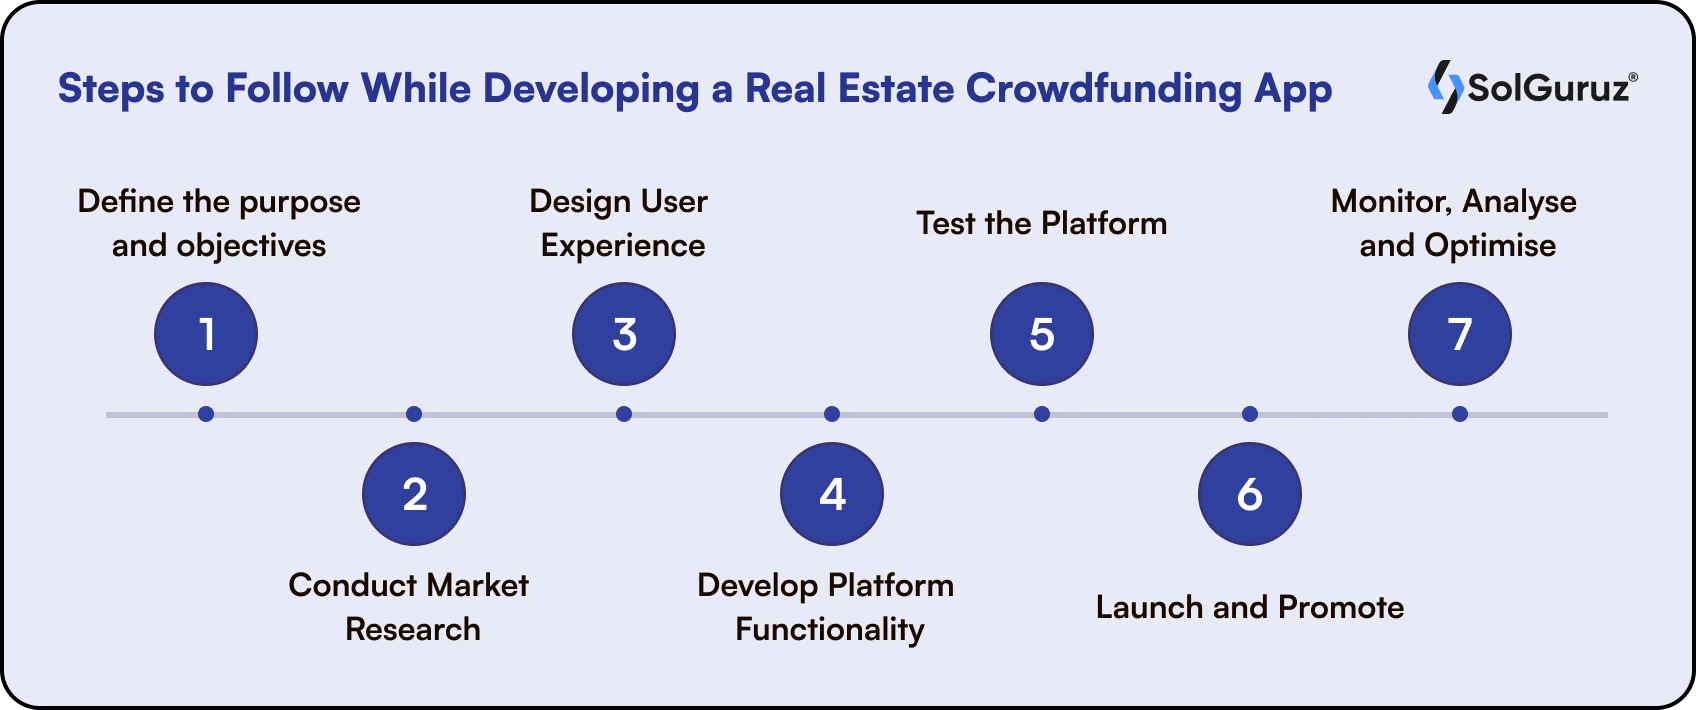 What are The Steps to Follow While Developing a Real Estate Crowdfunding App